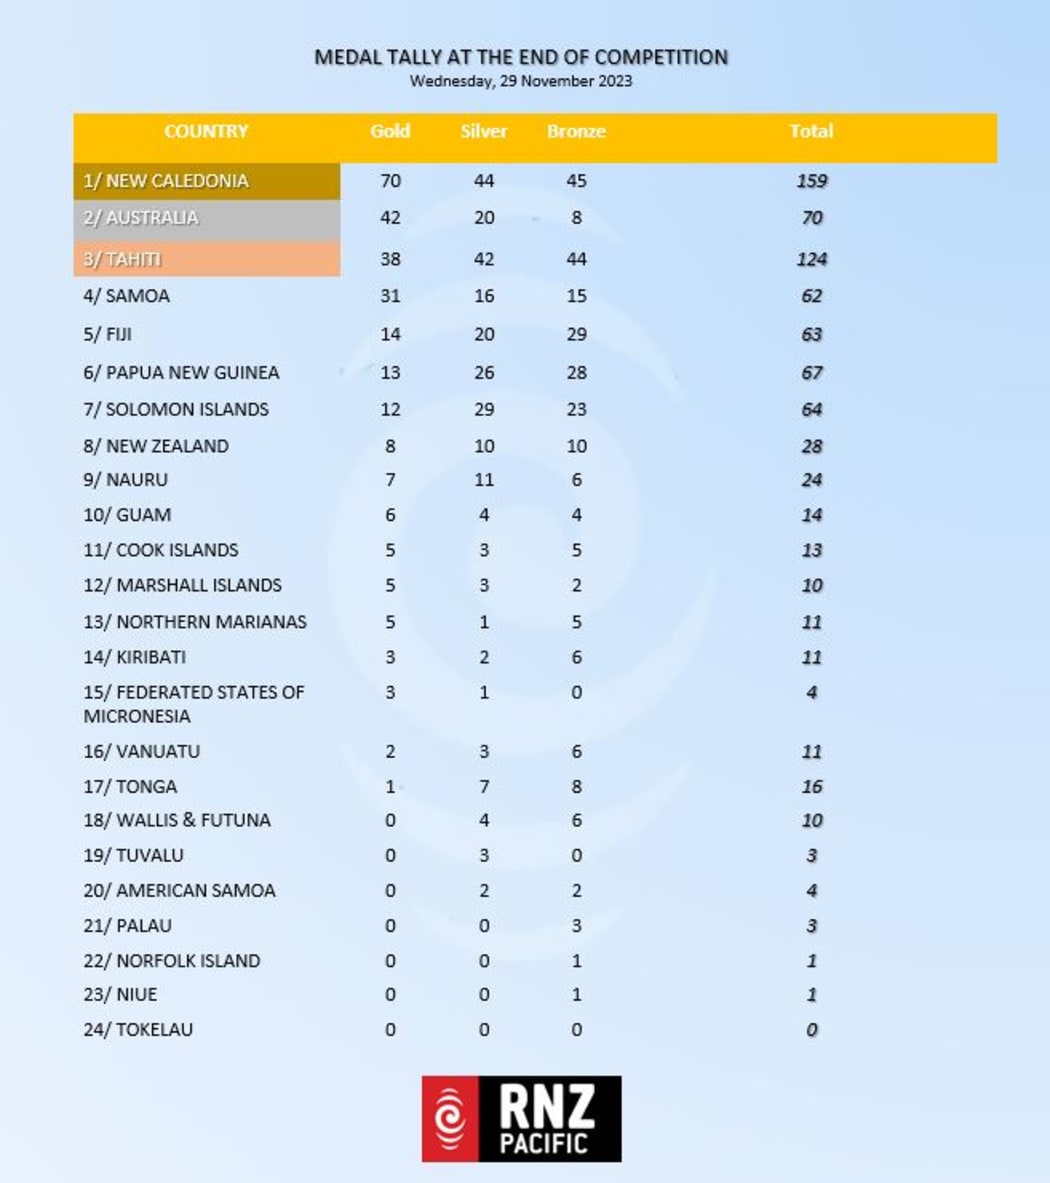 Pacific Games medal tally at the end of competition on Wednesday, 29 November 2023.